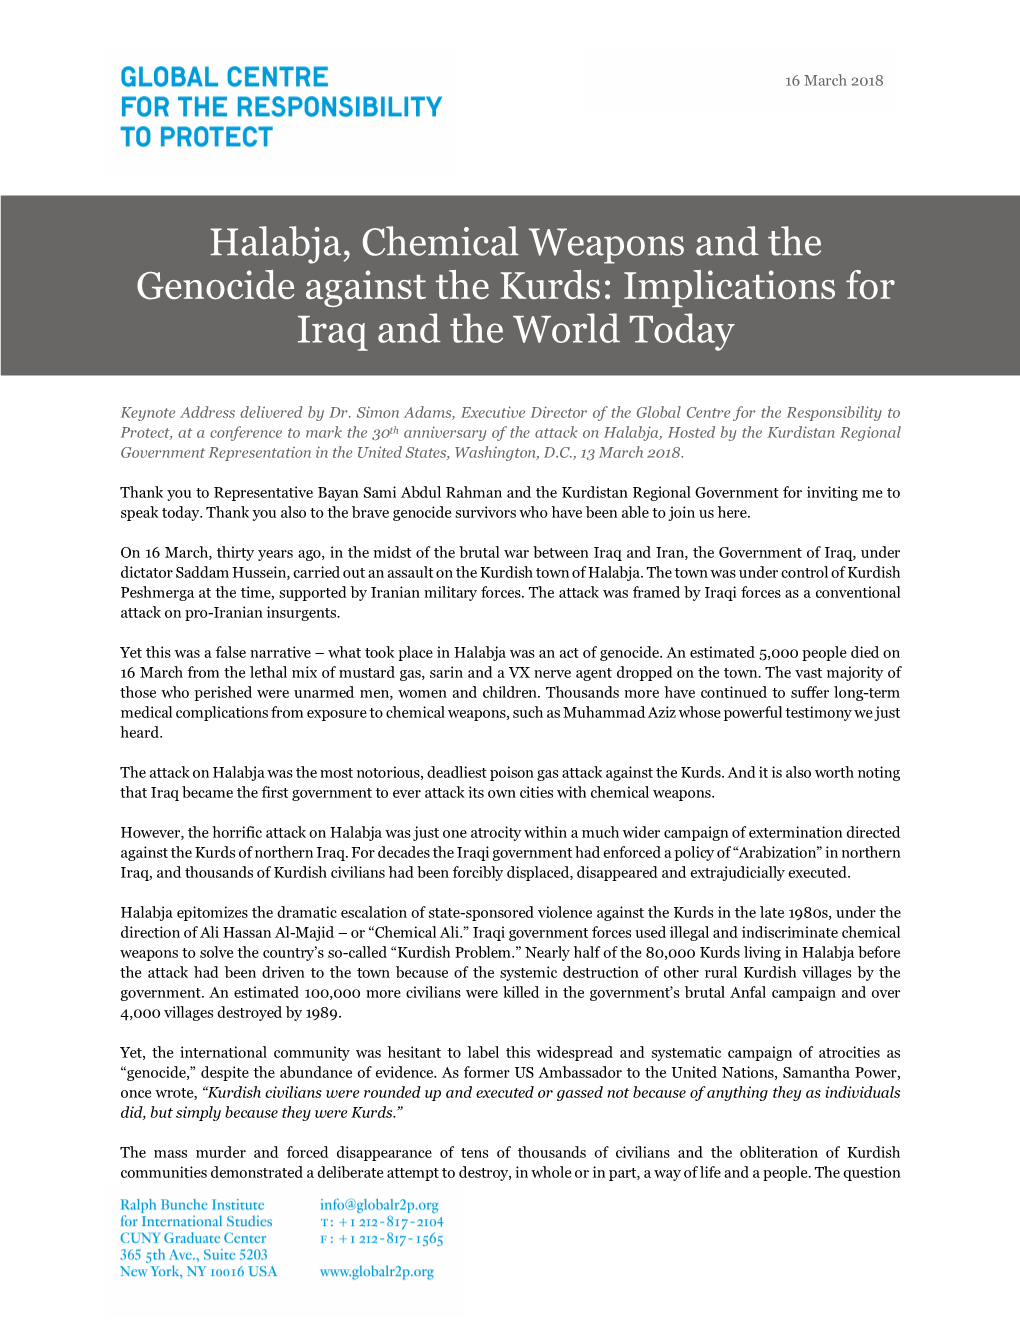 Halabja, Chemical Weapons and the Genocide Against the Kurds: Implications for Iraq and the World Today